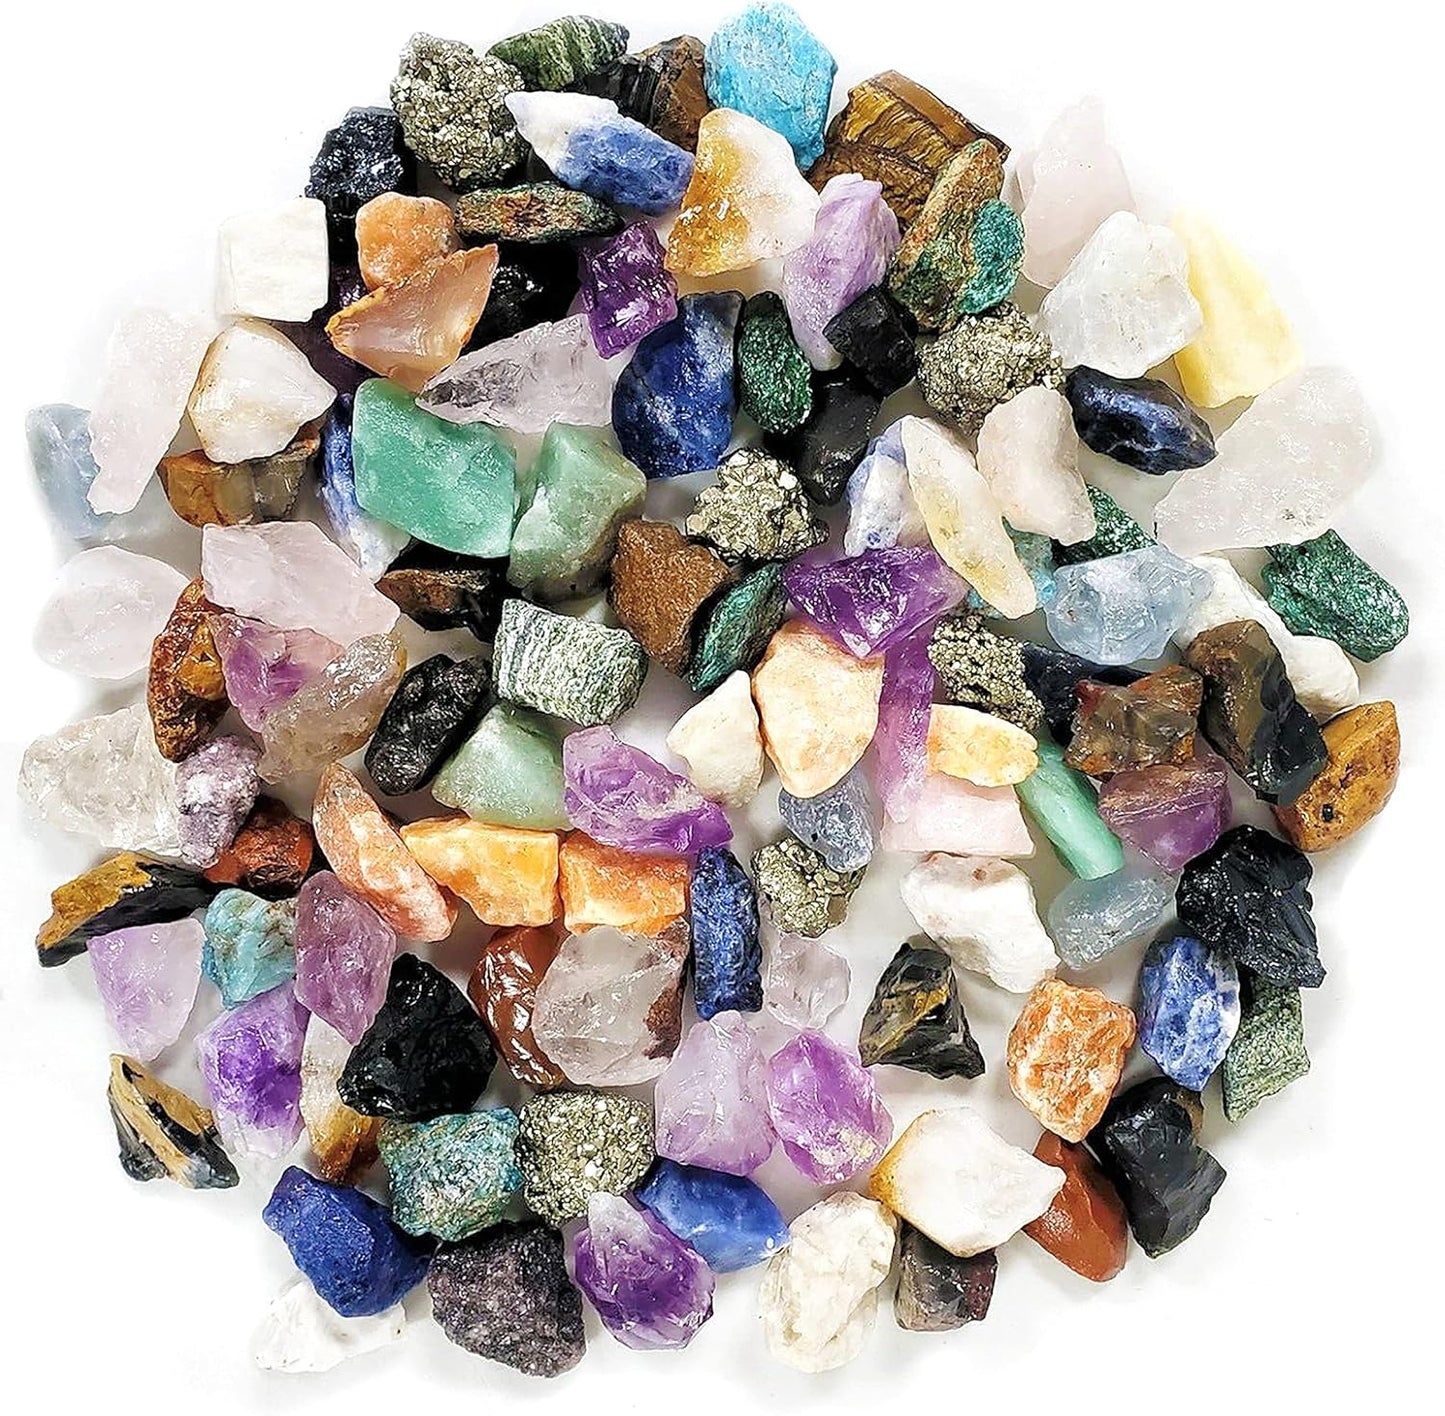 MEGA Rock, Fossil and Mineral Activity Kit